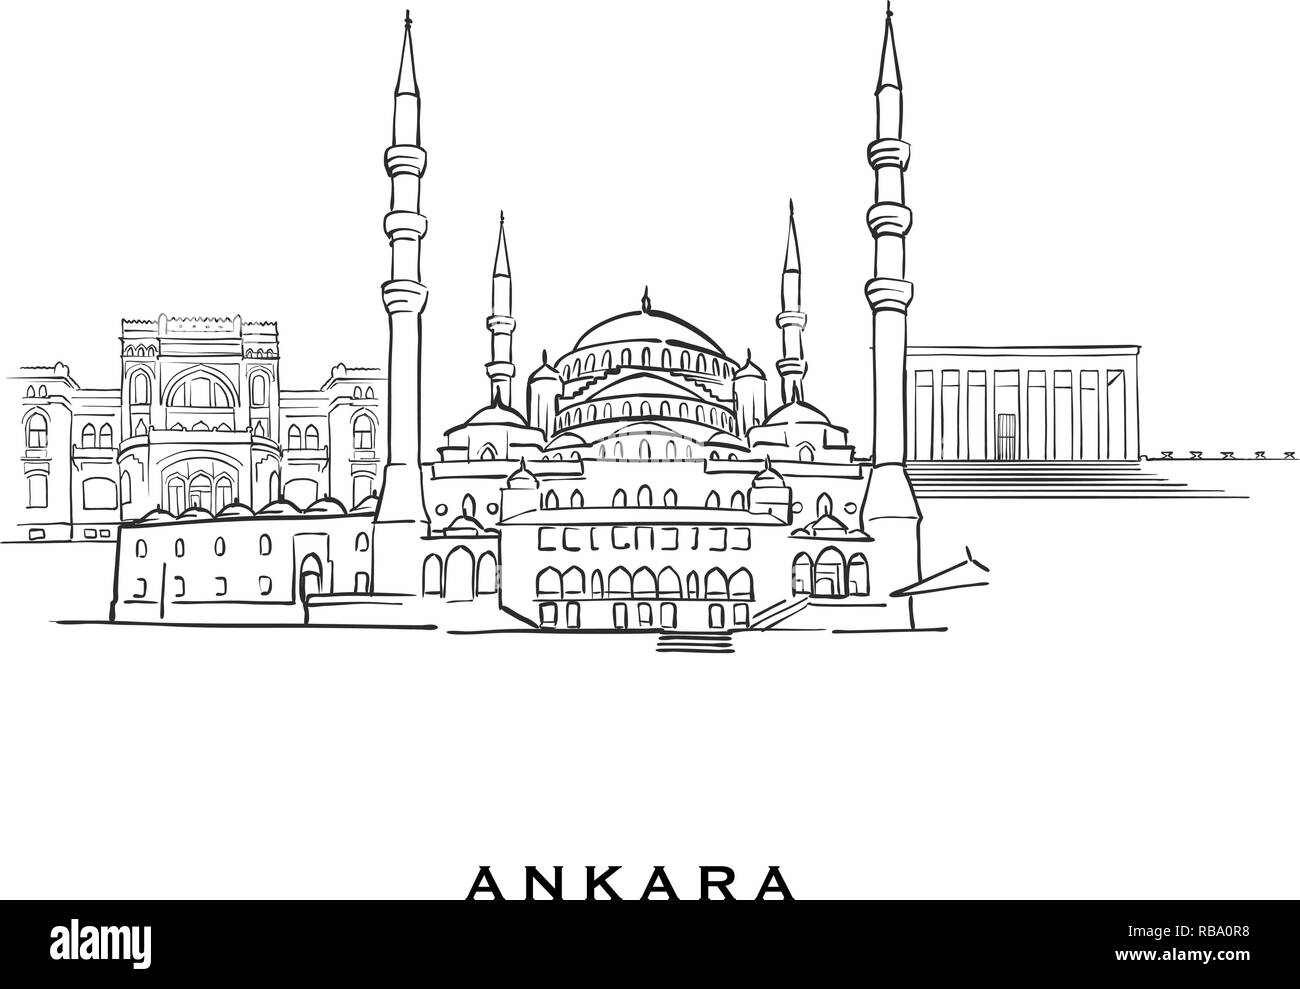 Ankara Turkey famous architecture. Outlined vector sketch separated on white background. Architecture drawings of all European capitals. Stock Vector